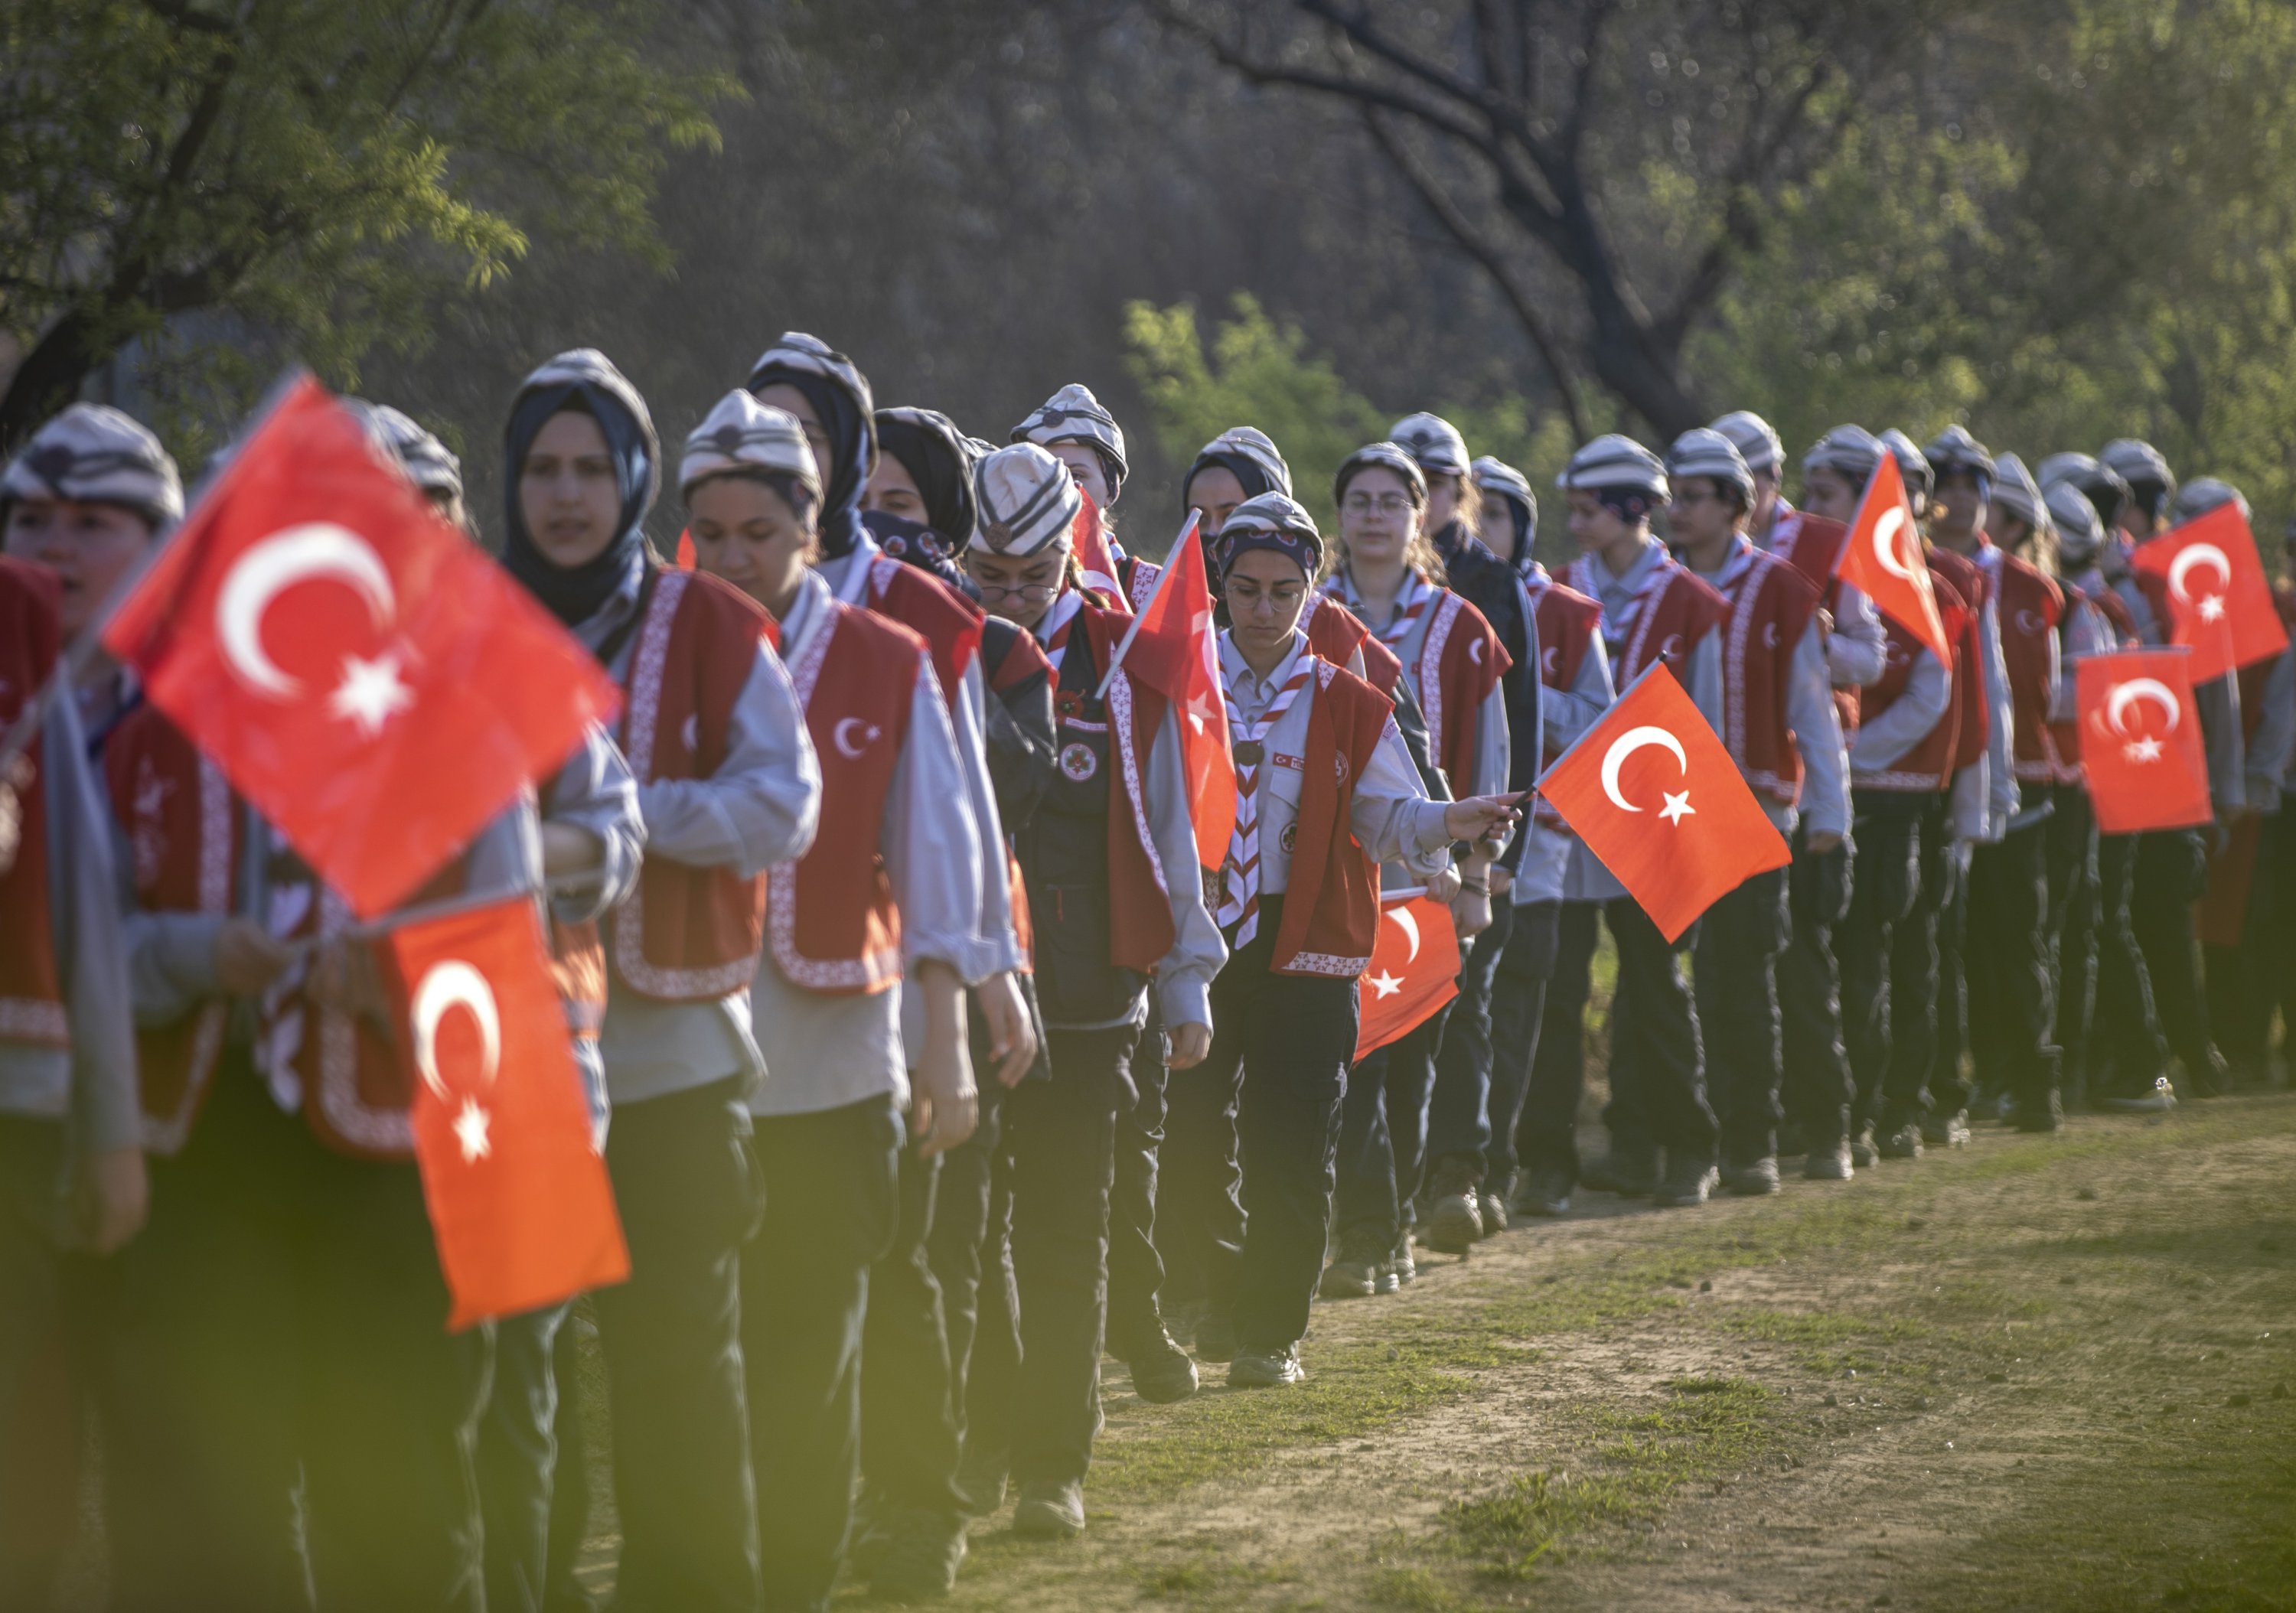 Turkish students attend the march to remember fallen soldiers, in Çanakkale, western Turkey, April 25, 2022. (AA Photo)